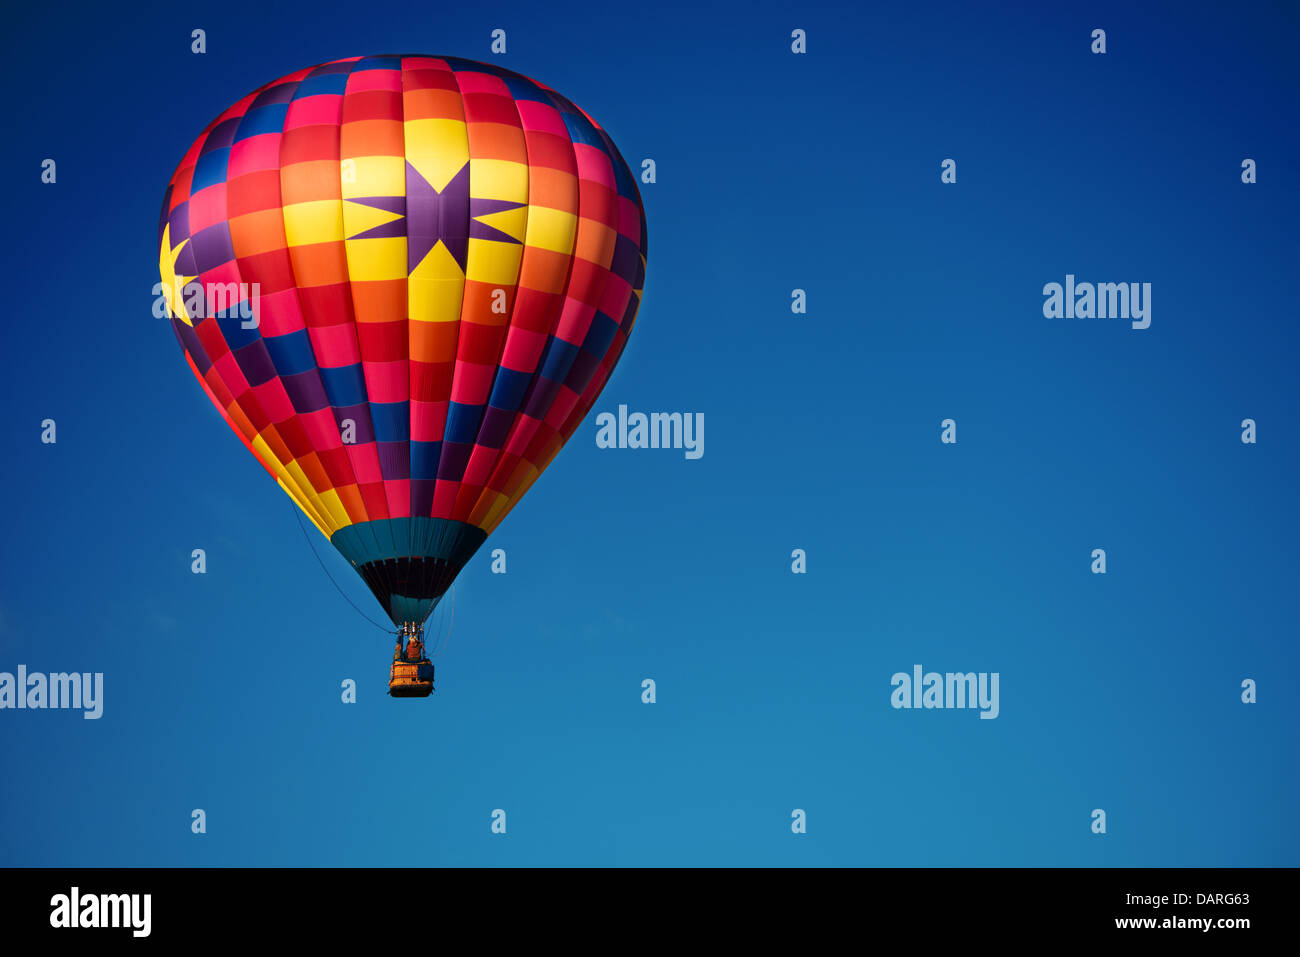 A brightly colored hot air balloon with a sky blue background Stock Photo